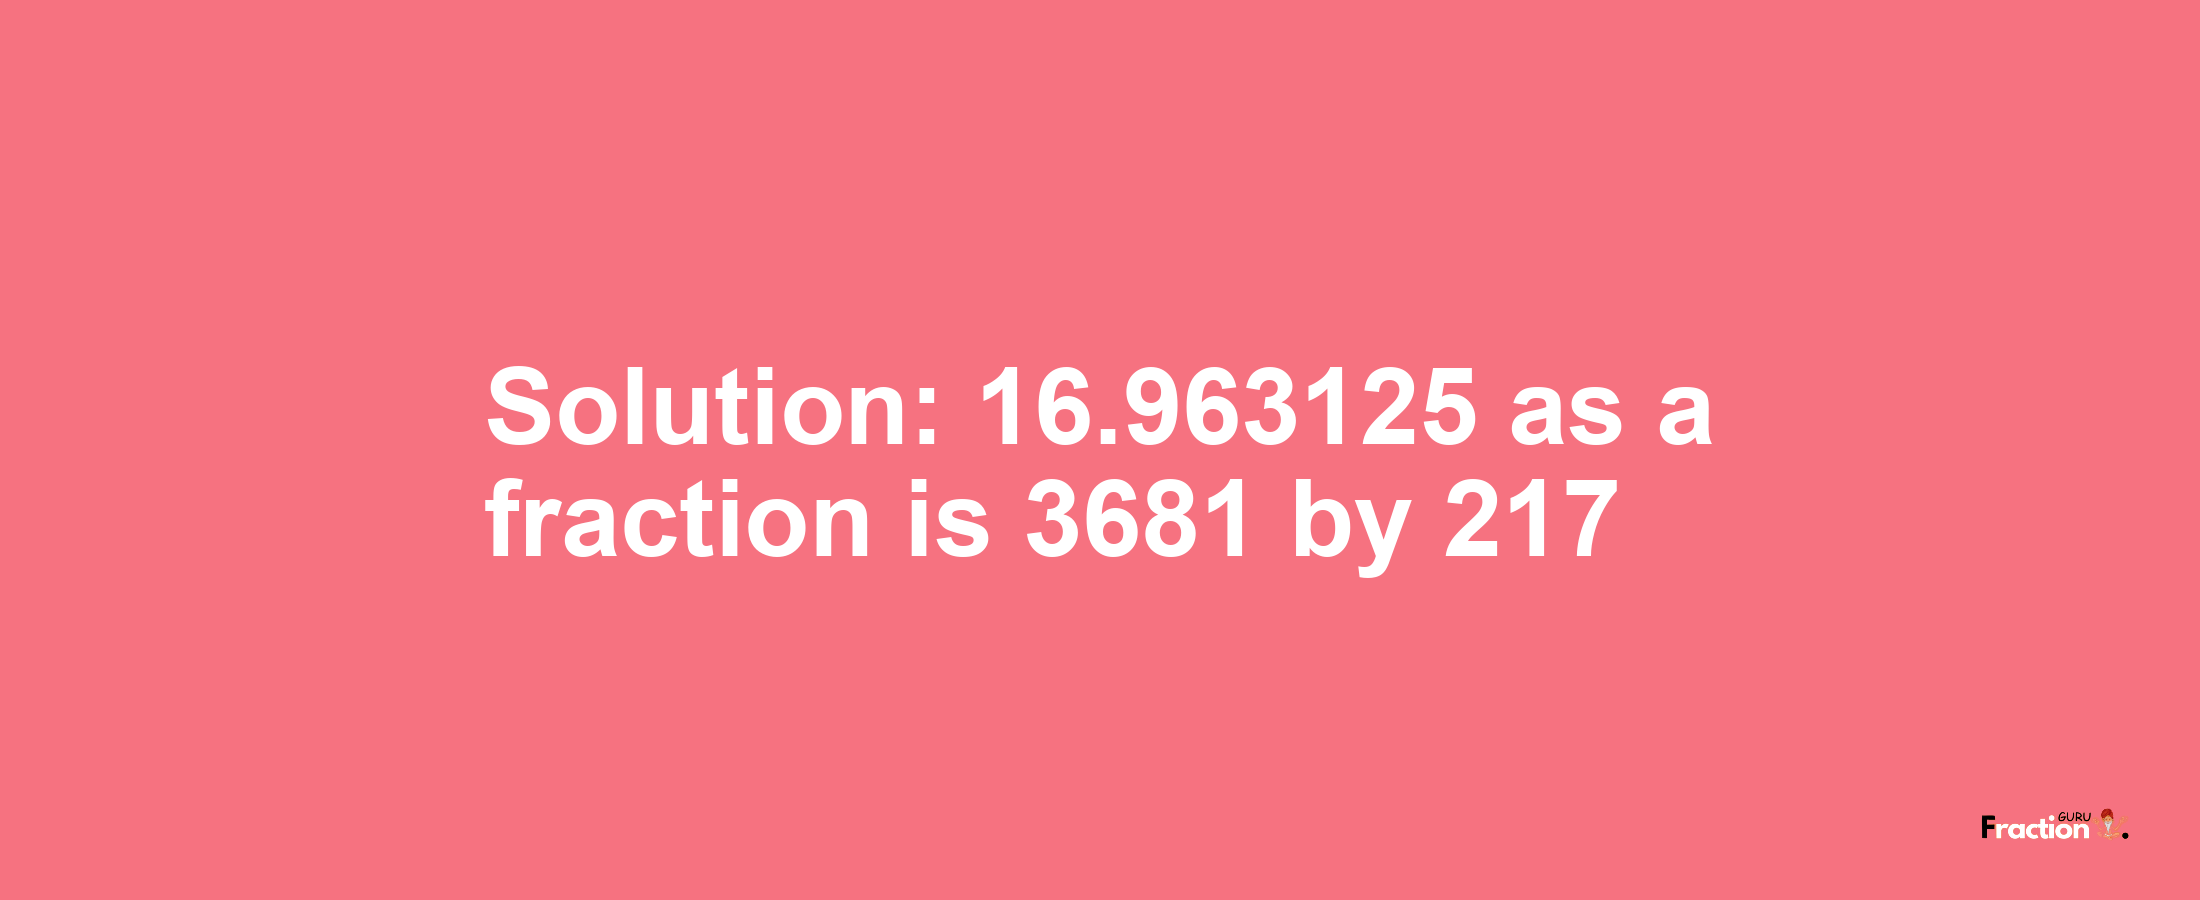 Solution:16.963125 as a fraction is 3681/217